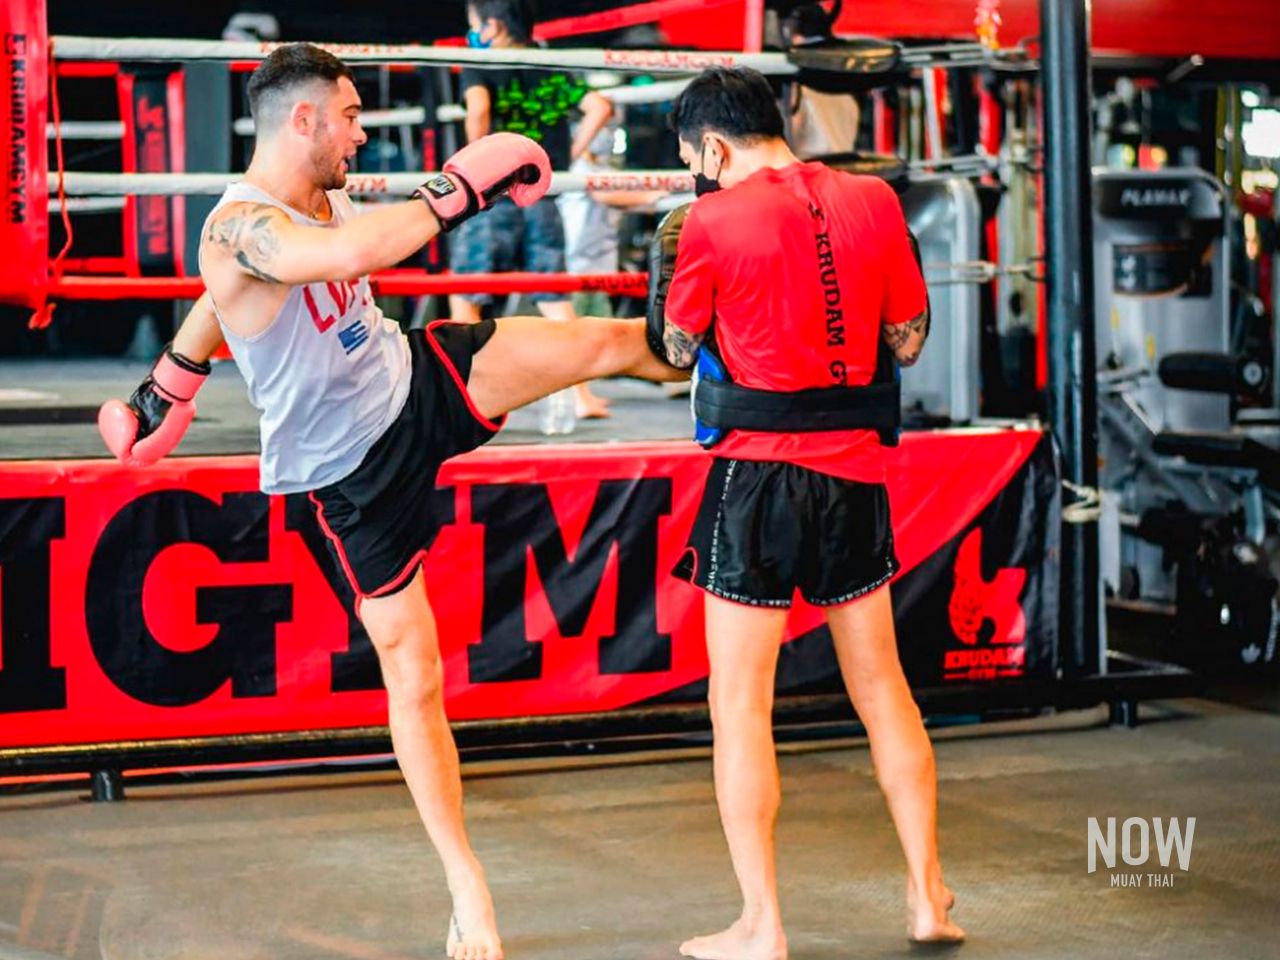 experience and expertise of the Muay Thai gym and trainer